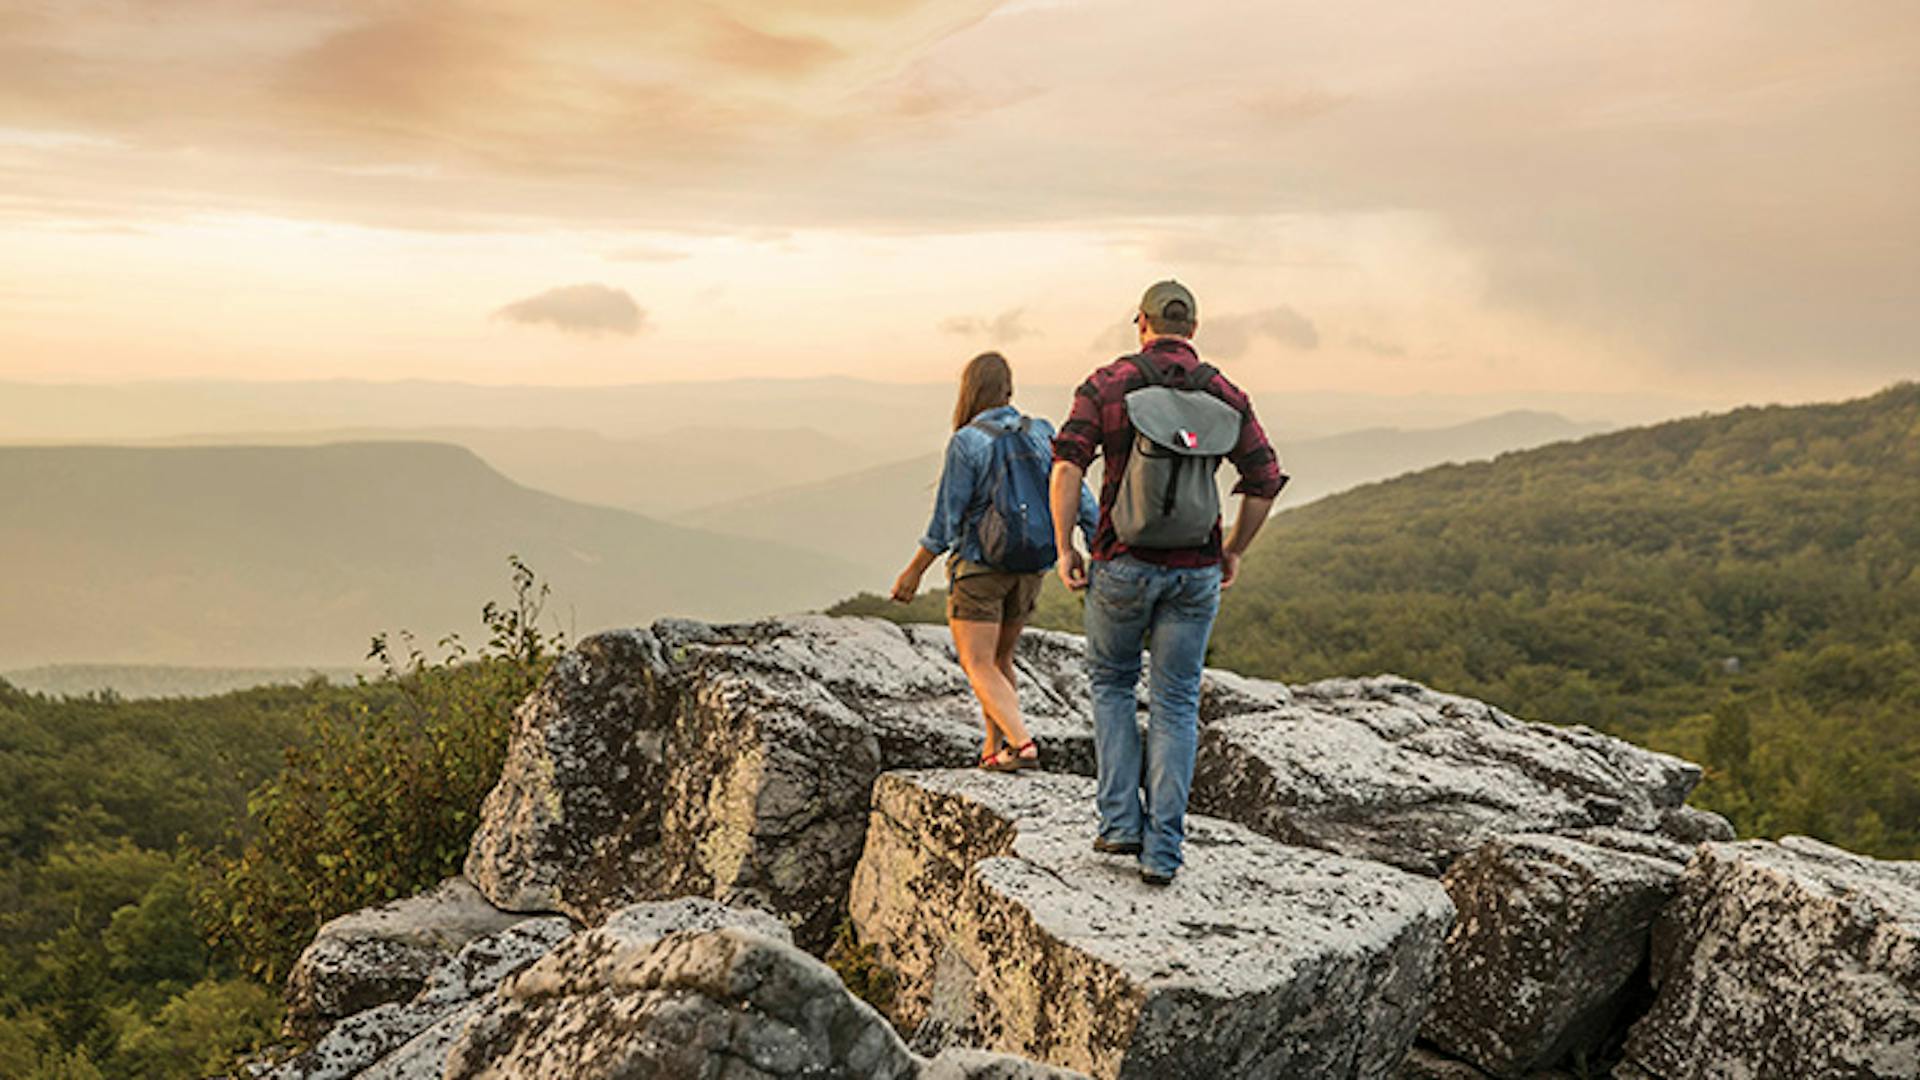 People hiking on rock overlooking mountains in Dolly Sods Wilderness in Davis, West Virginia (photo courtesy of West Virginia Department of Tourism)